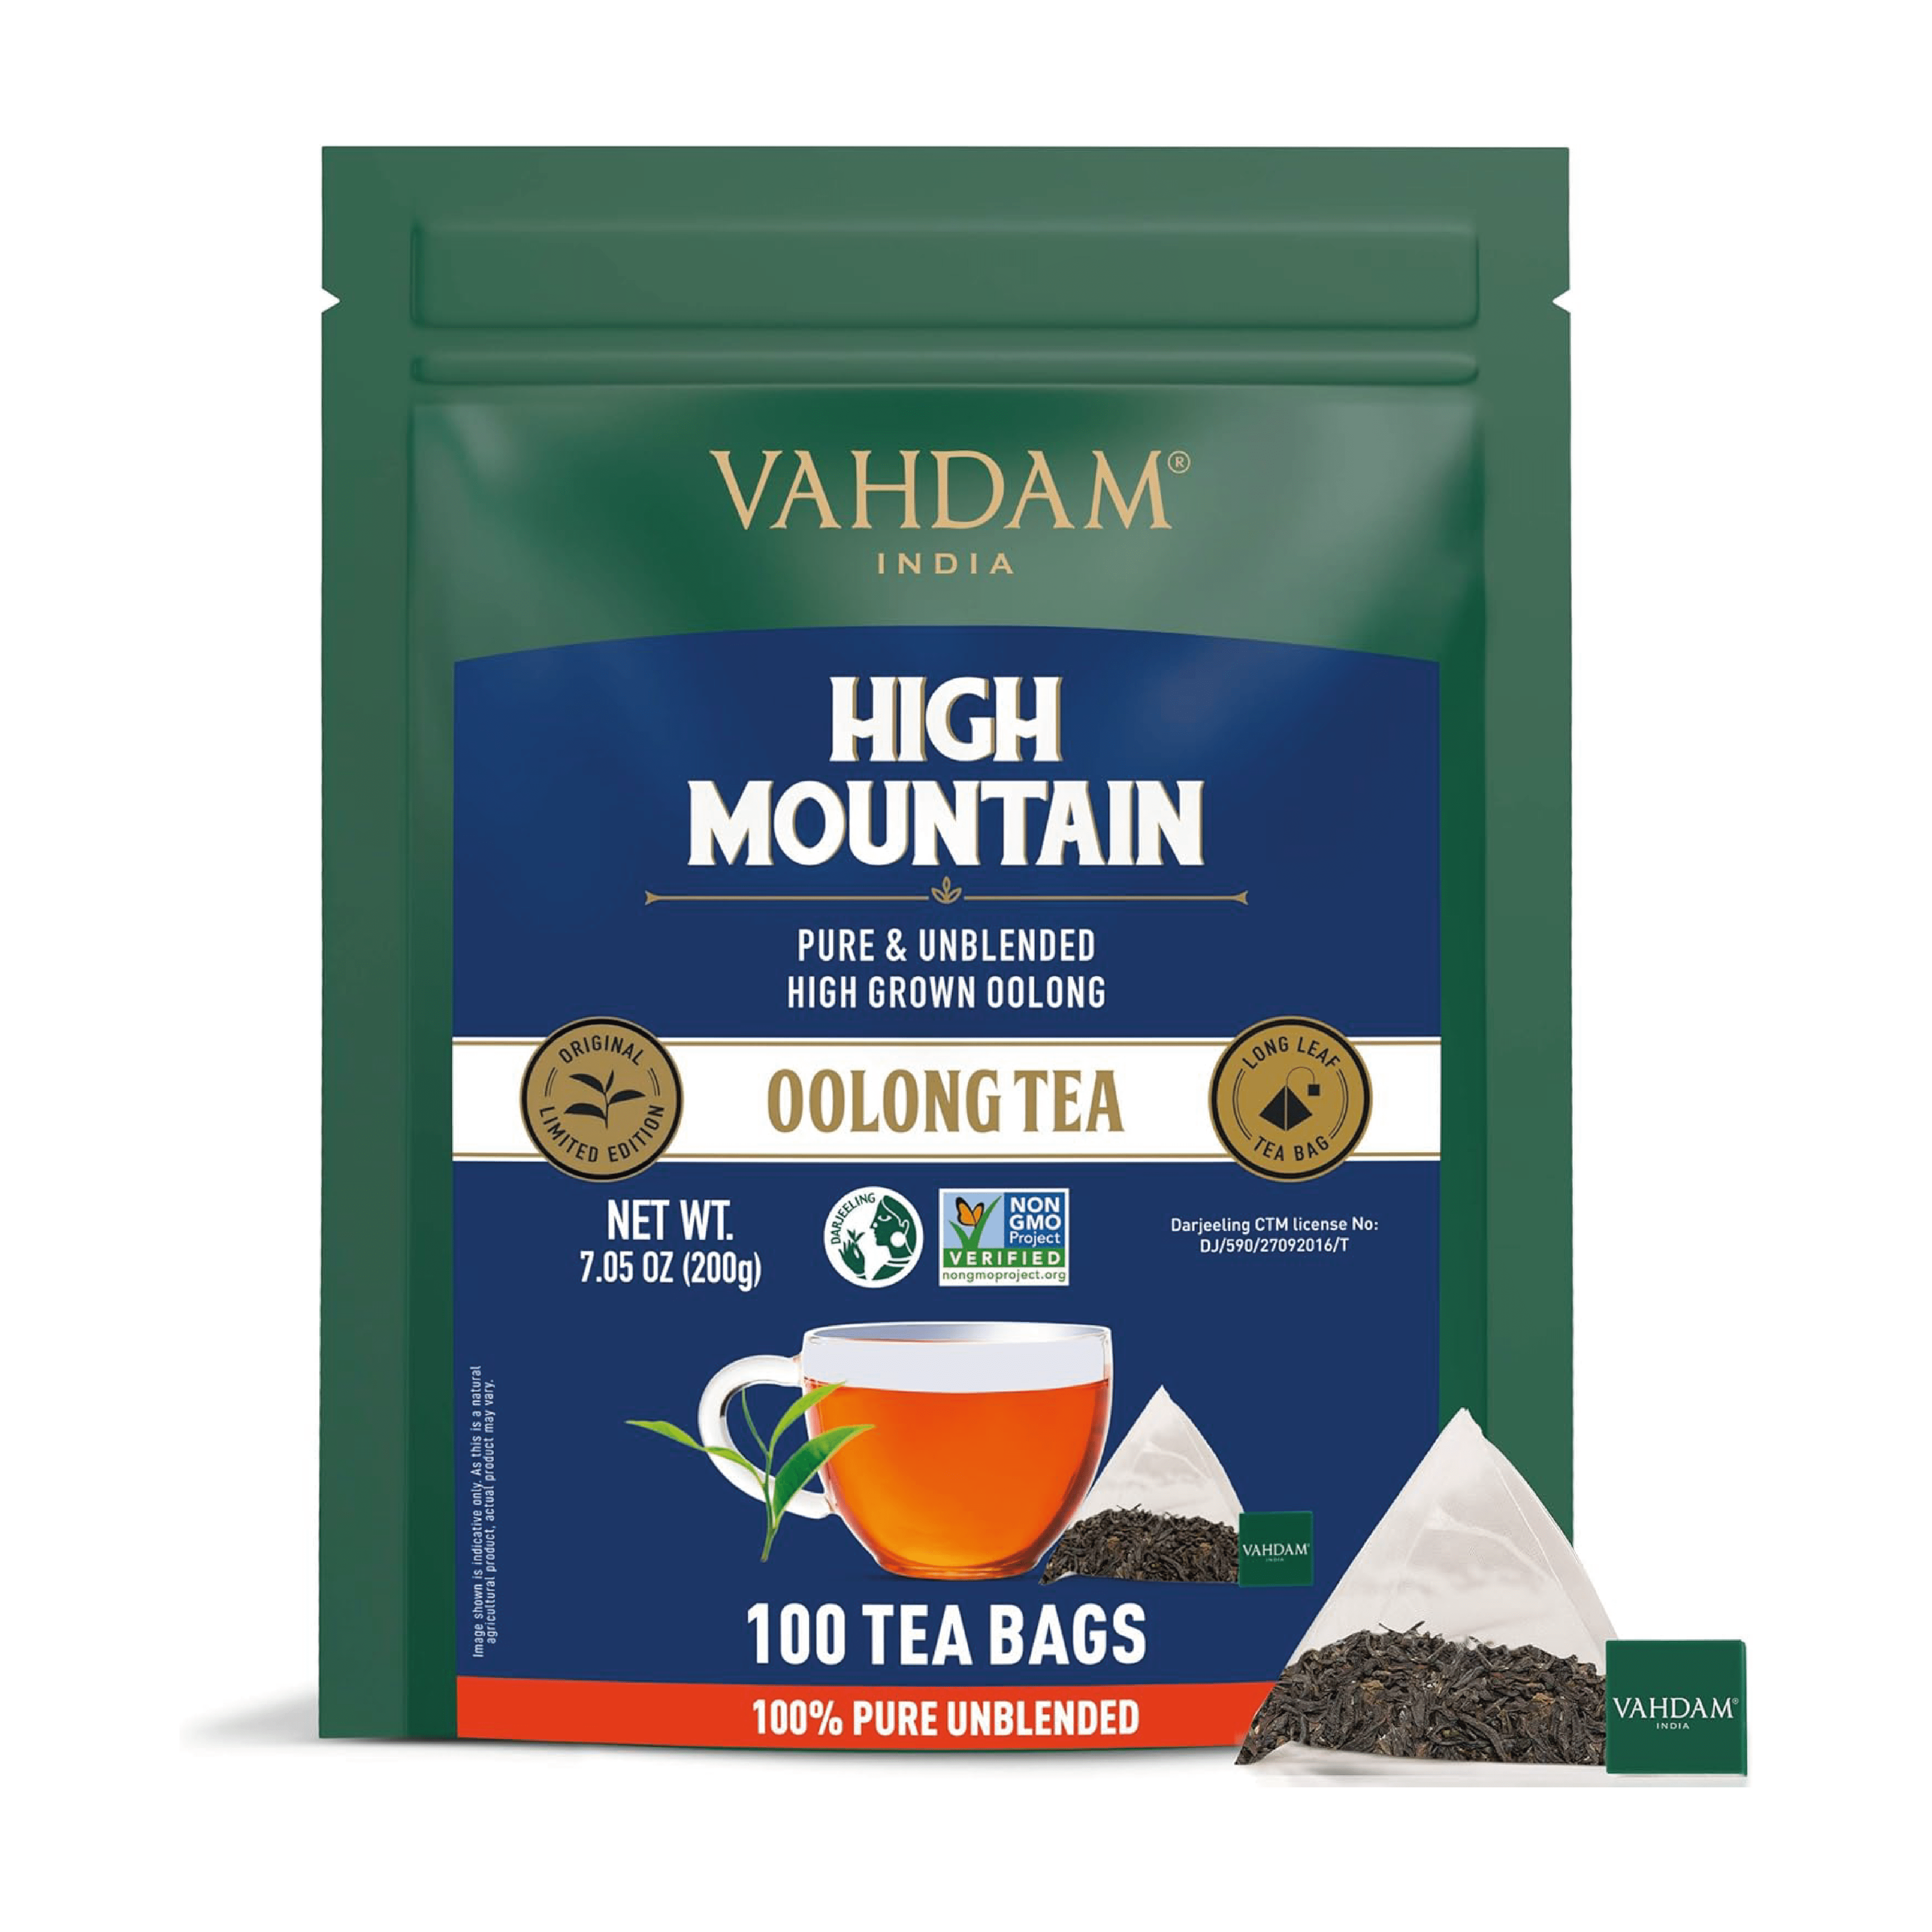 Indulge in the exquisite world of tea with VAHDAM's High Mountain Oolong Tea Bags, a generous pack of 100.